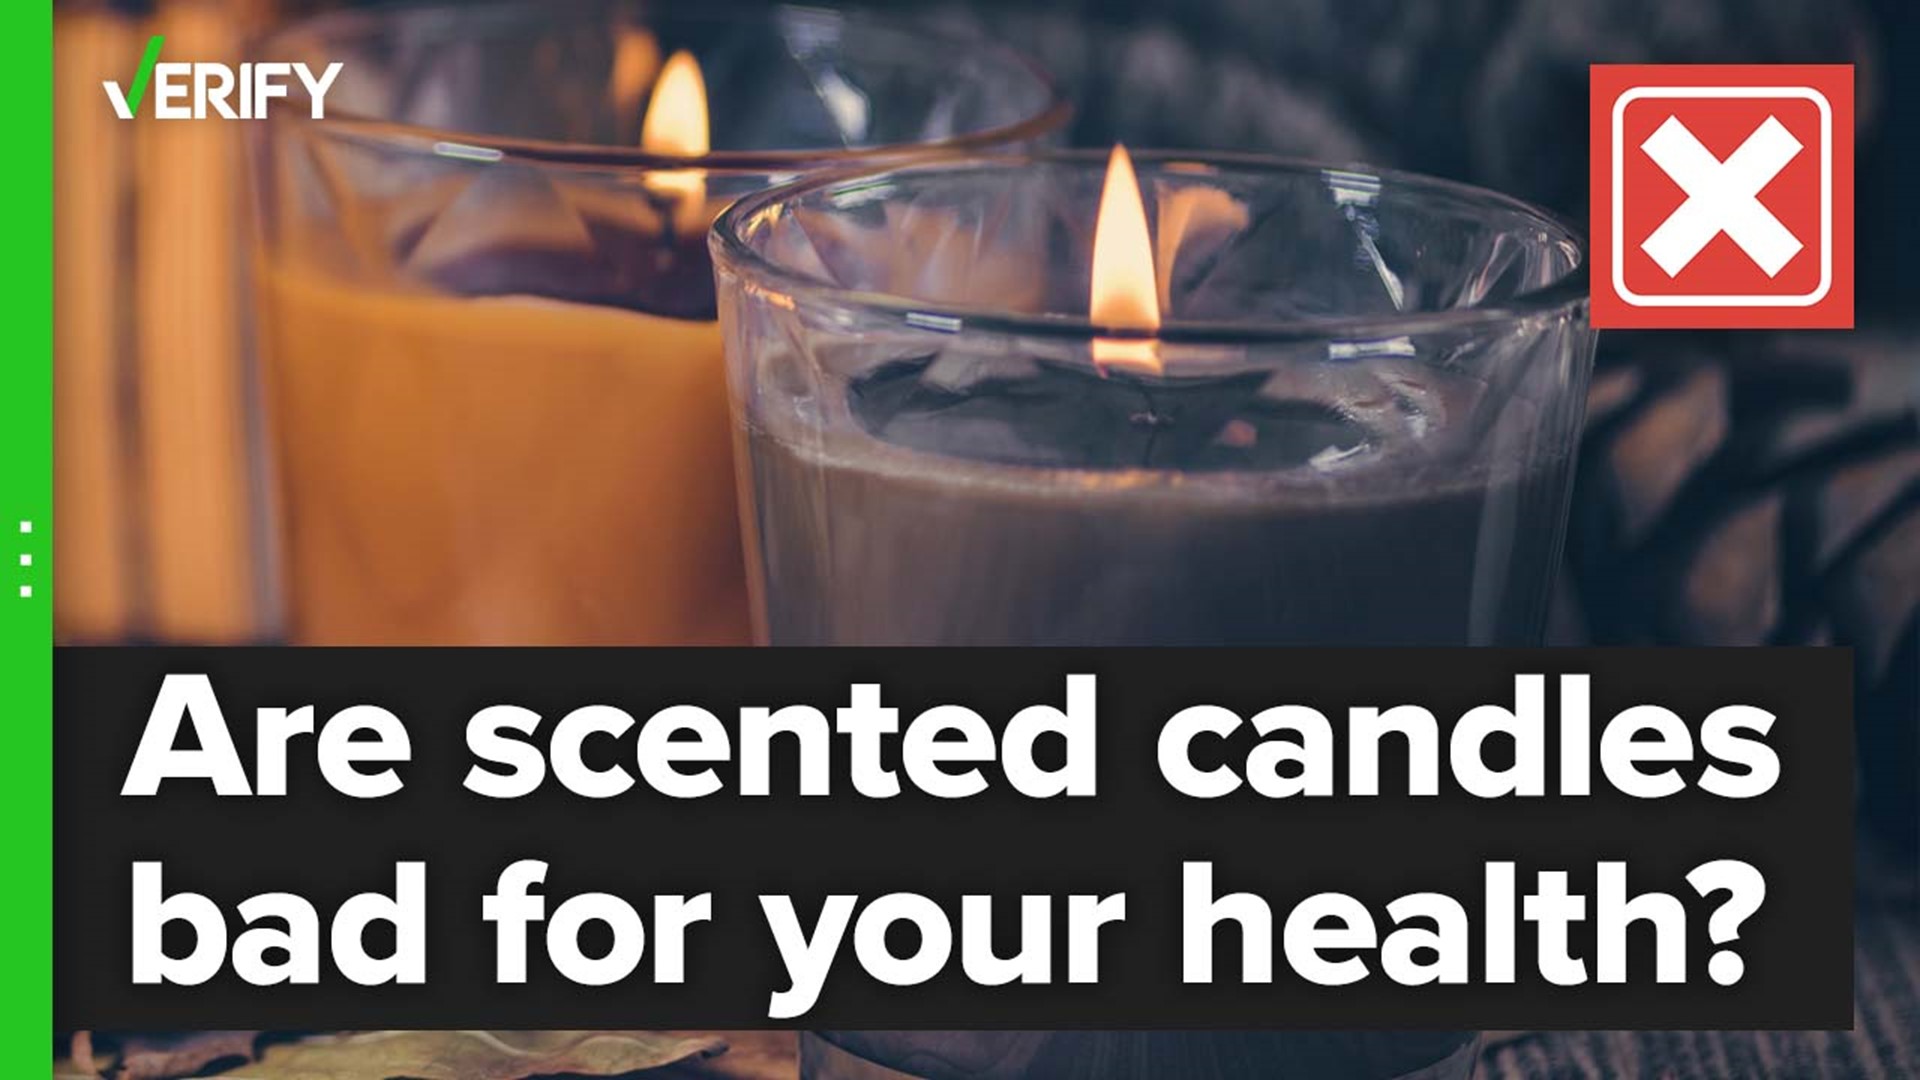 Experts say exposure to the chemicals used in scented candles is so low that they pose no significant risk to human health.